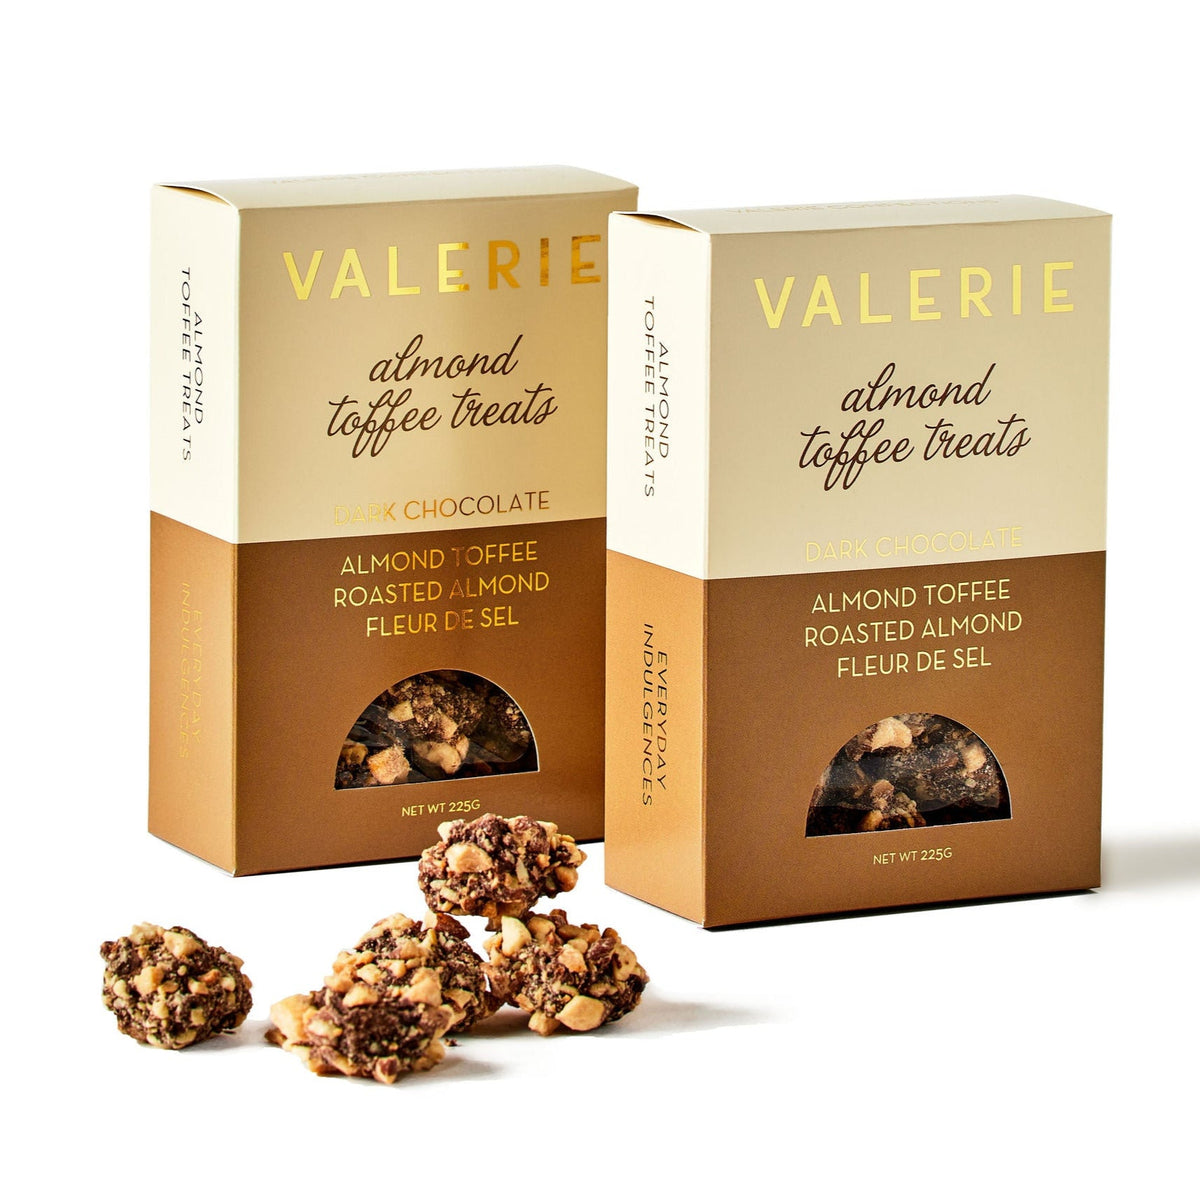 Two boxes of Valerie Almond Toffee Treats with some toffee clusters in front.